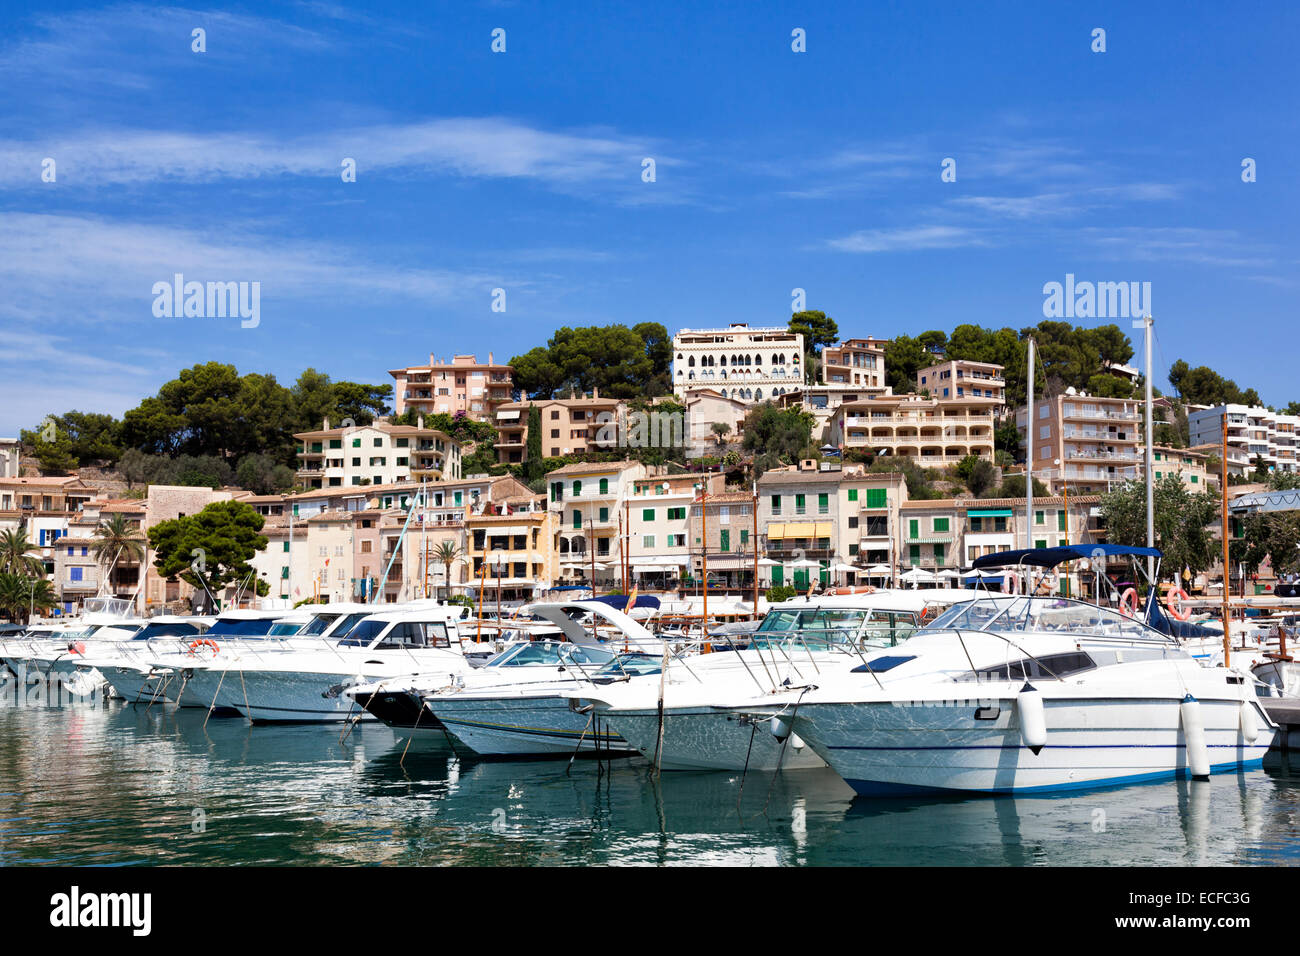 Boats in the sea port of Soller, Majorca, Spain Stock Photo